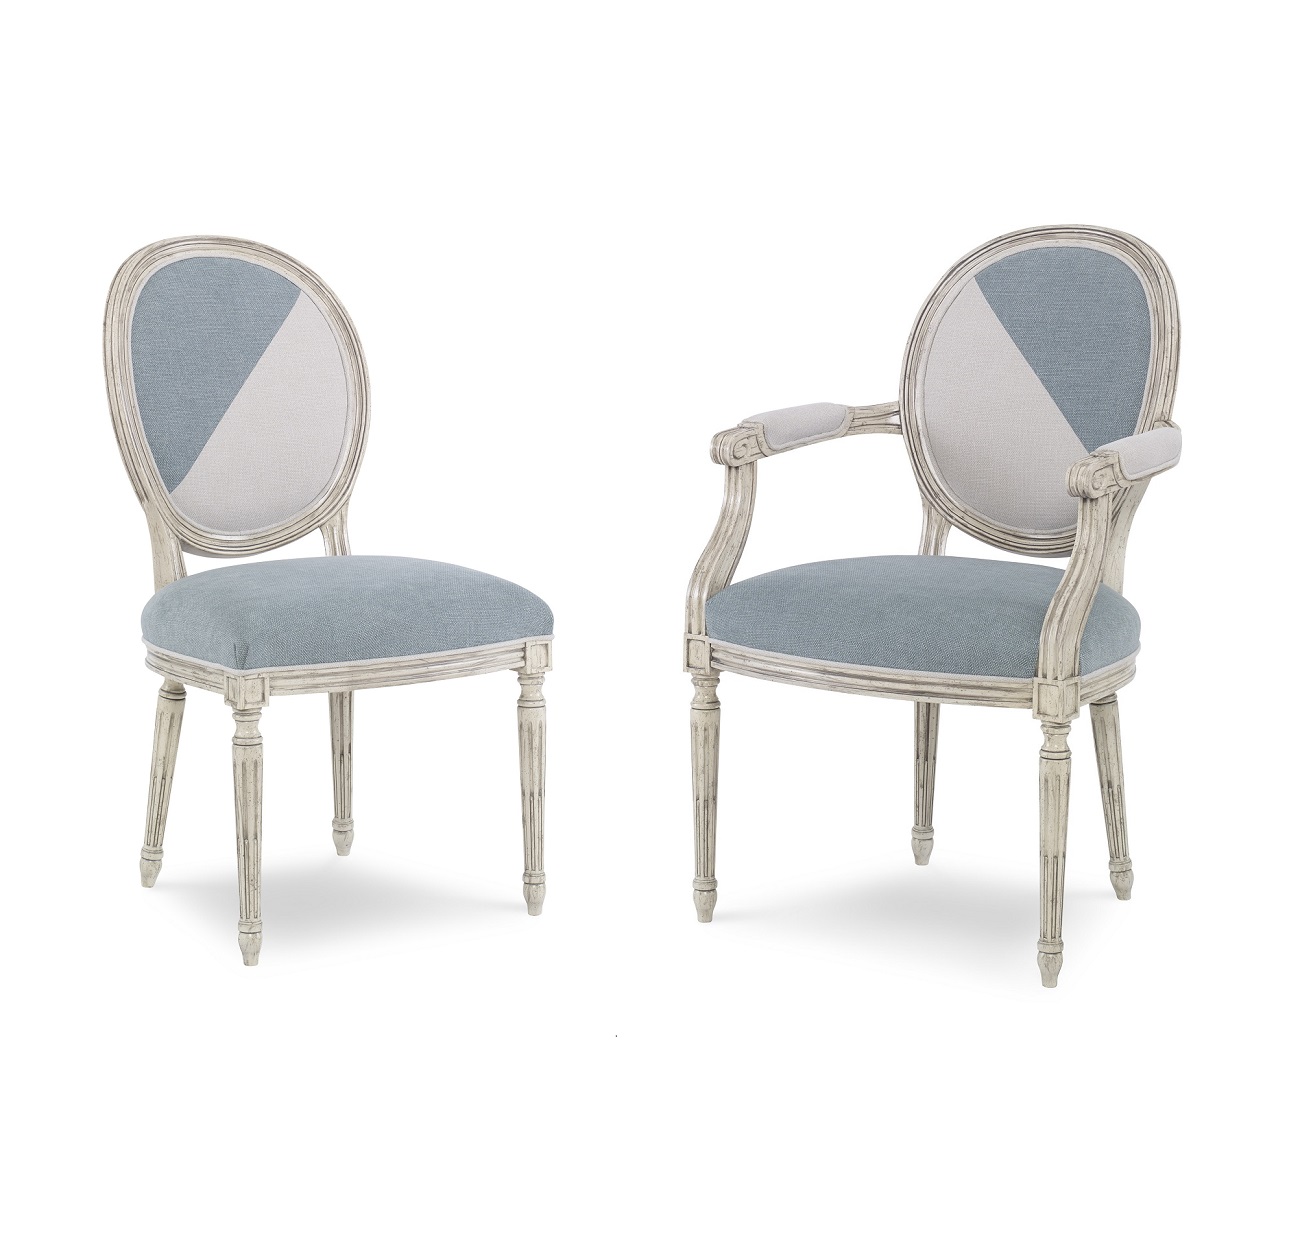 Dauphin Dining Chair